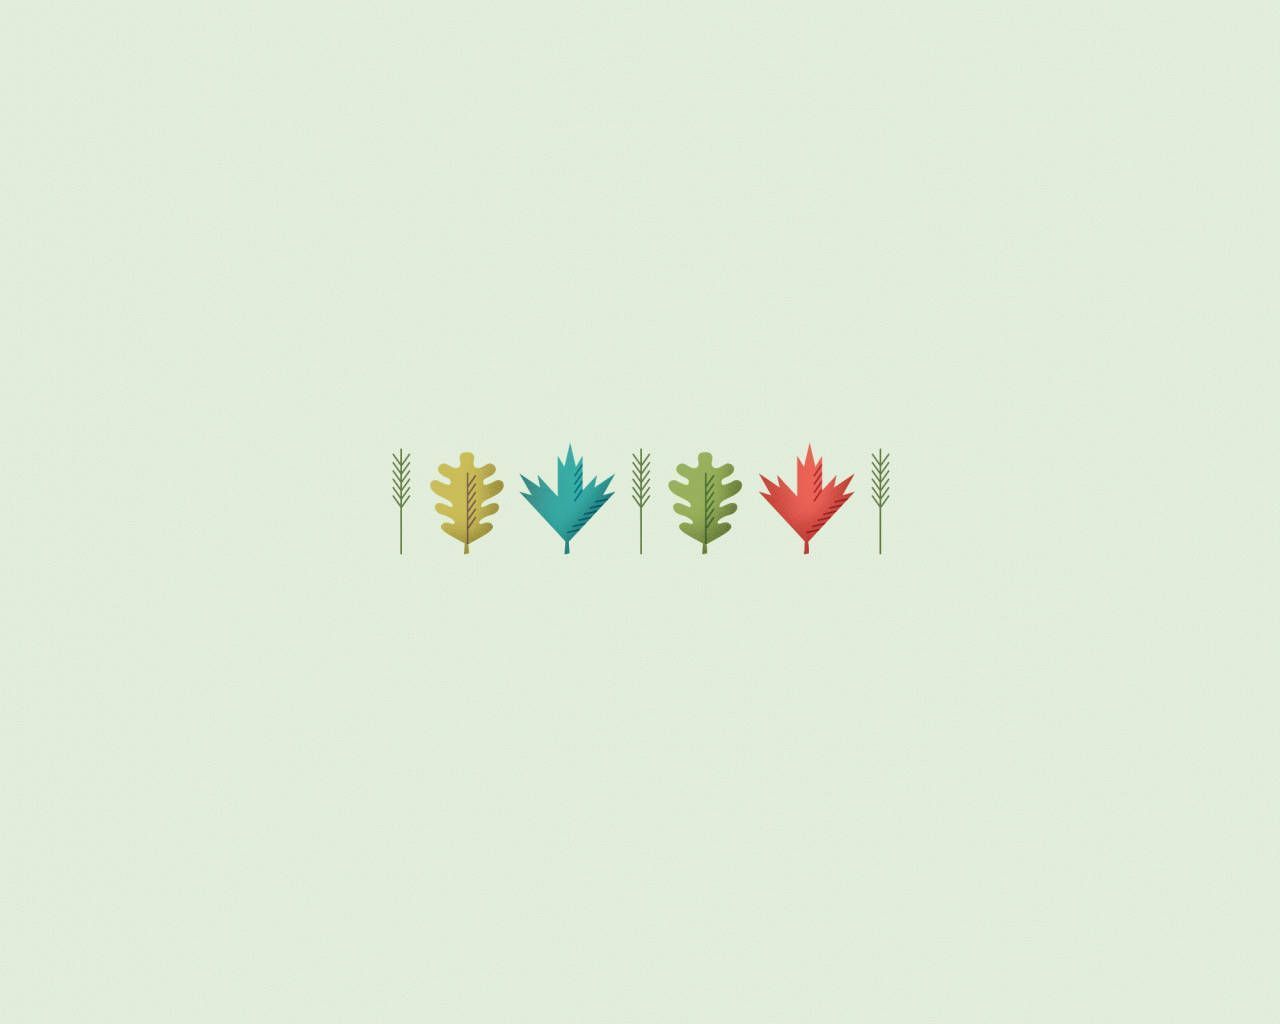 A row of six colorful leaves of varying sizes and colors. - 1280x1024